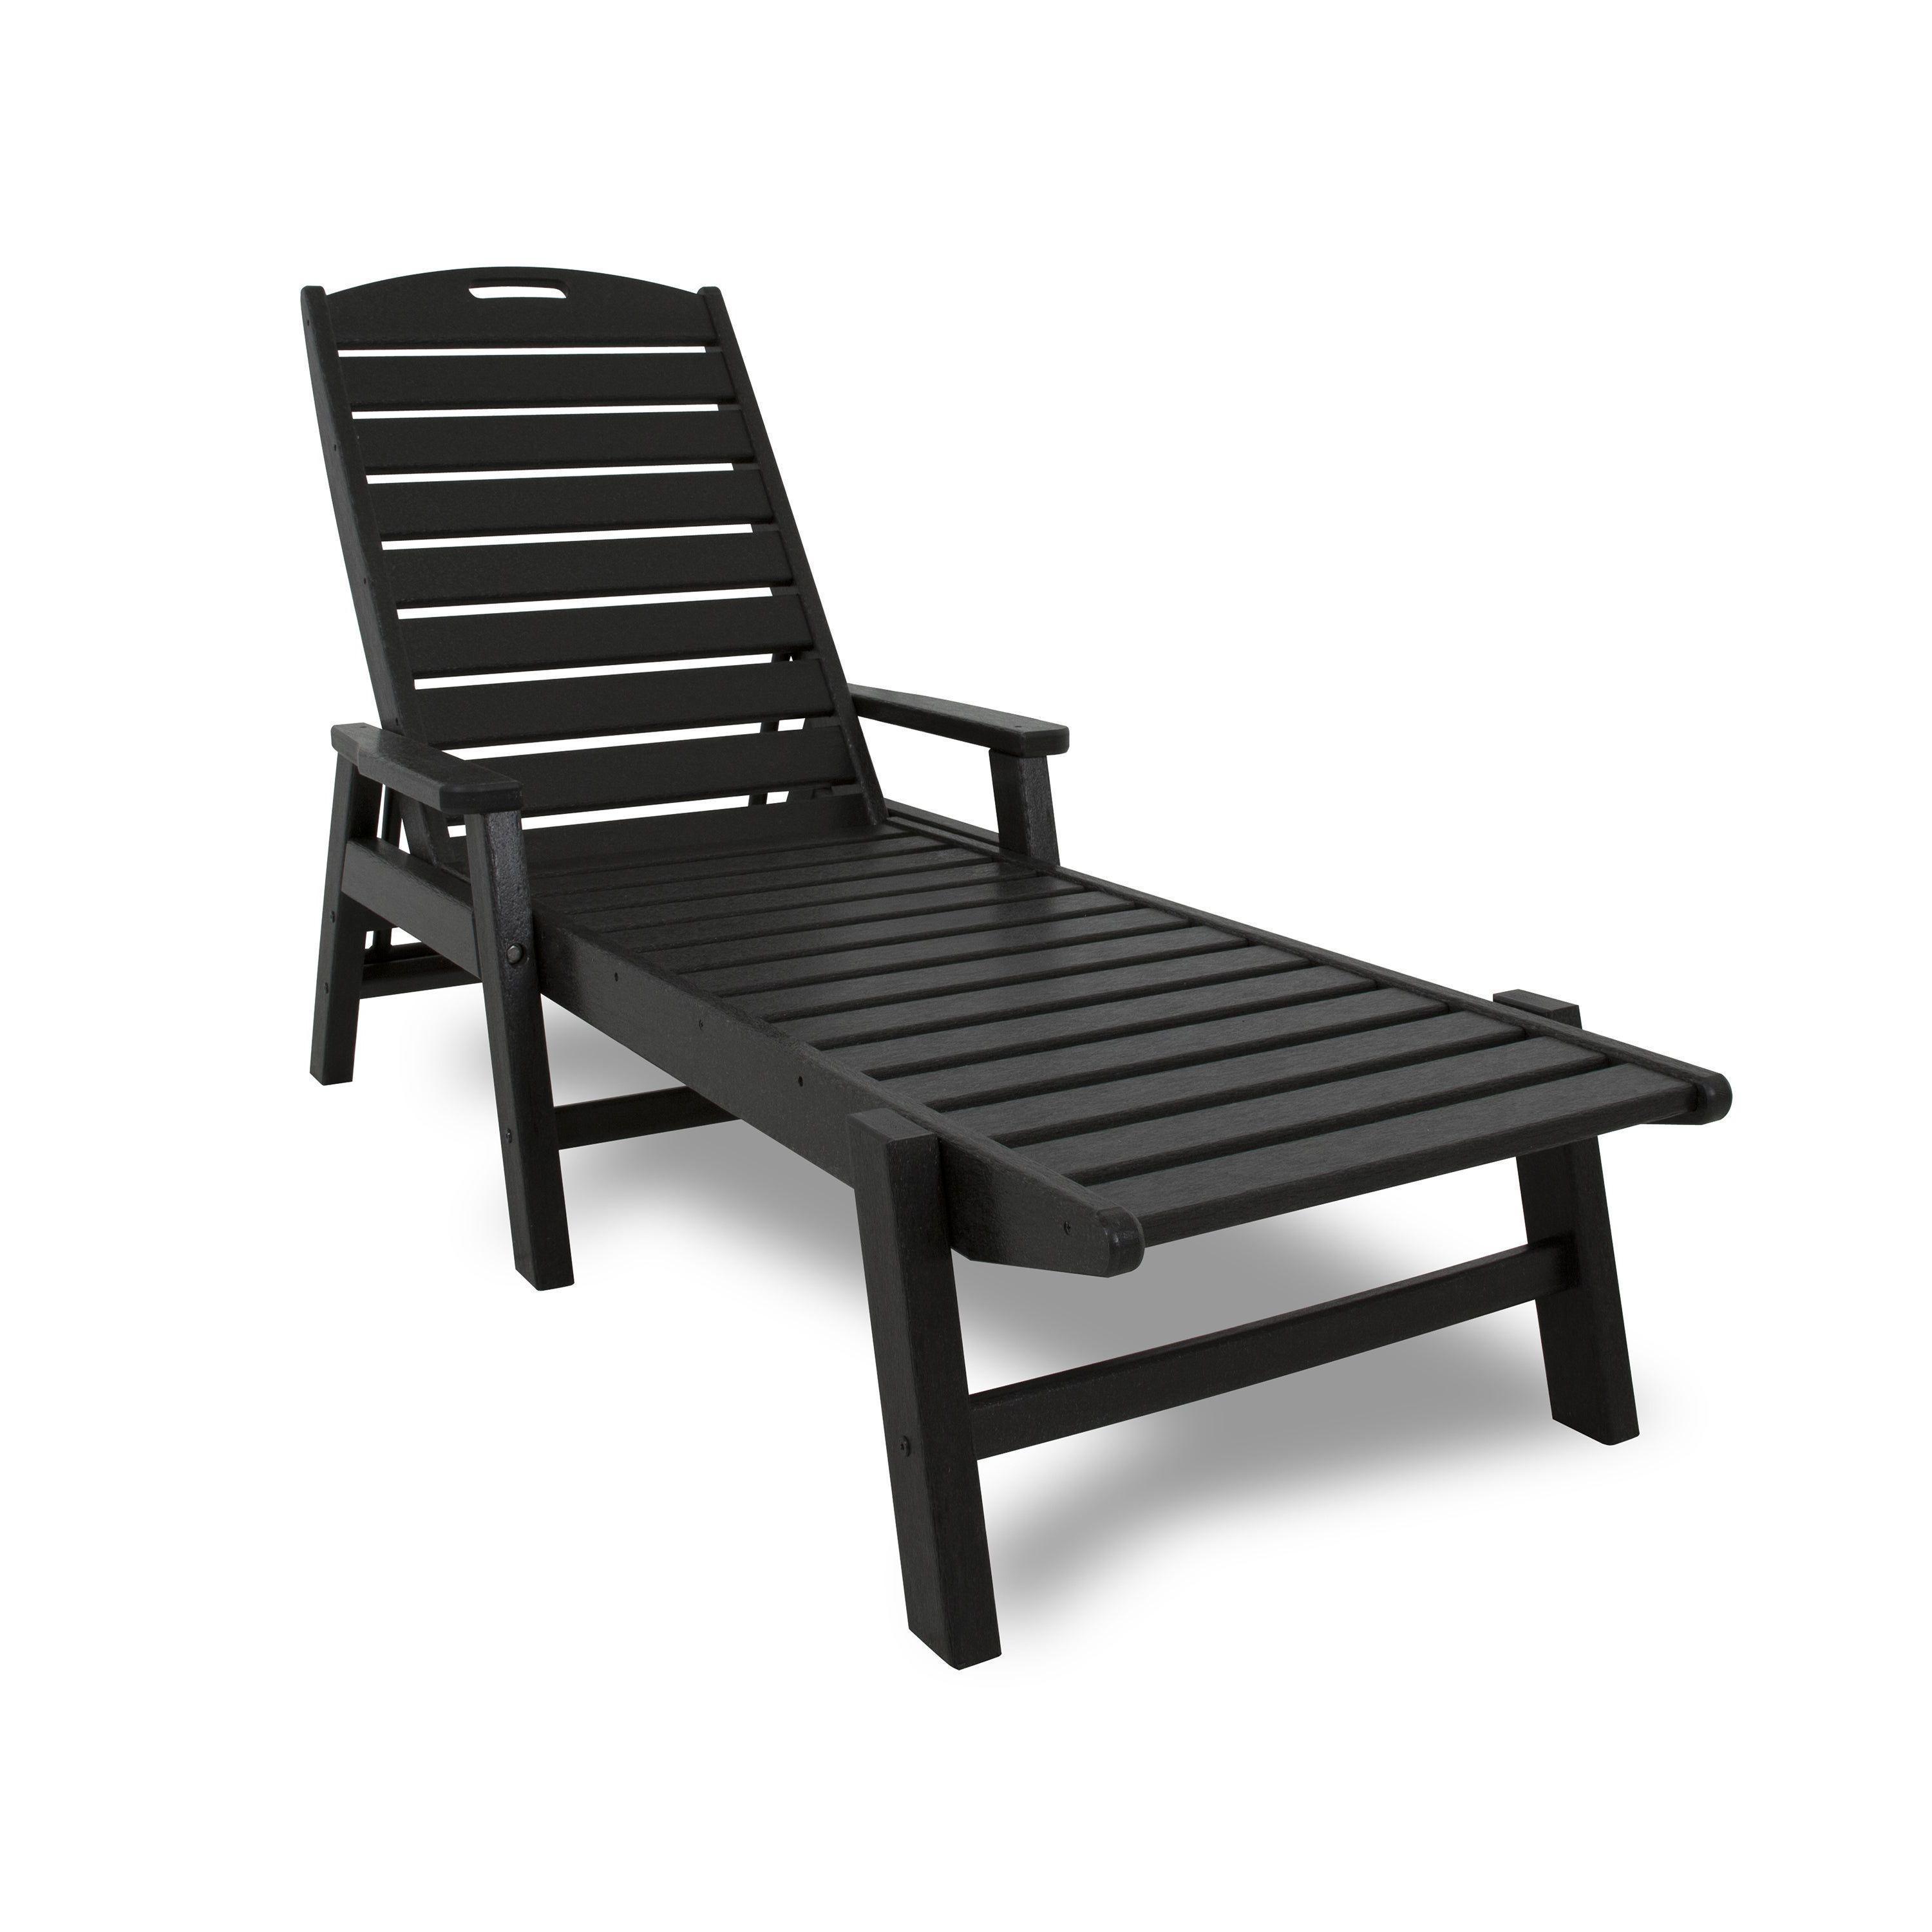 Polywood® Nautical Outdoor Chaise Lounge With Arms, Stackable, Ncc2280 Intended For Current Nautical Outdoor Chaise Lounges With Arms (View 1 of 25)